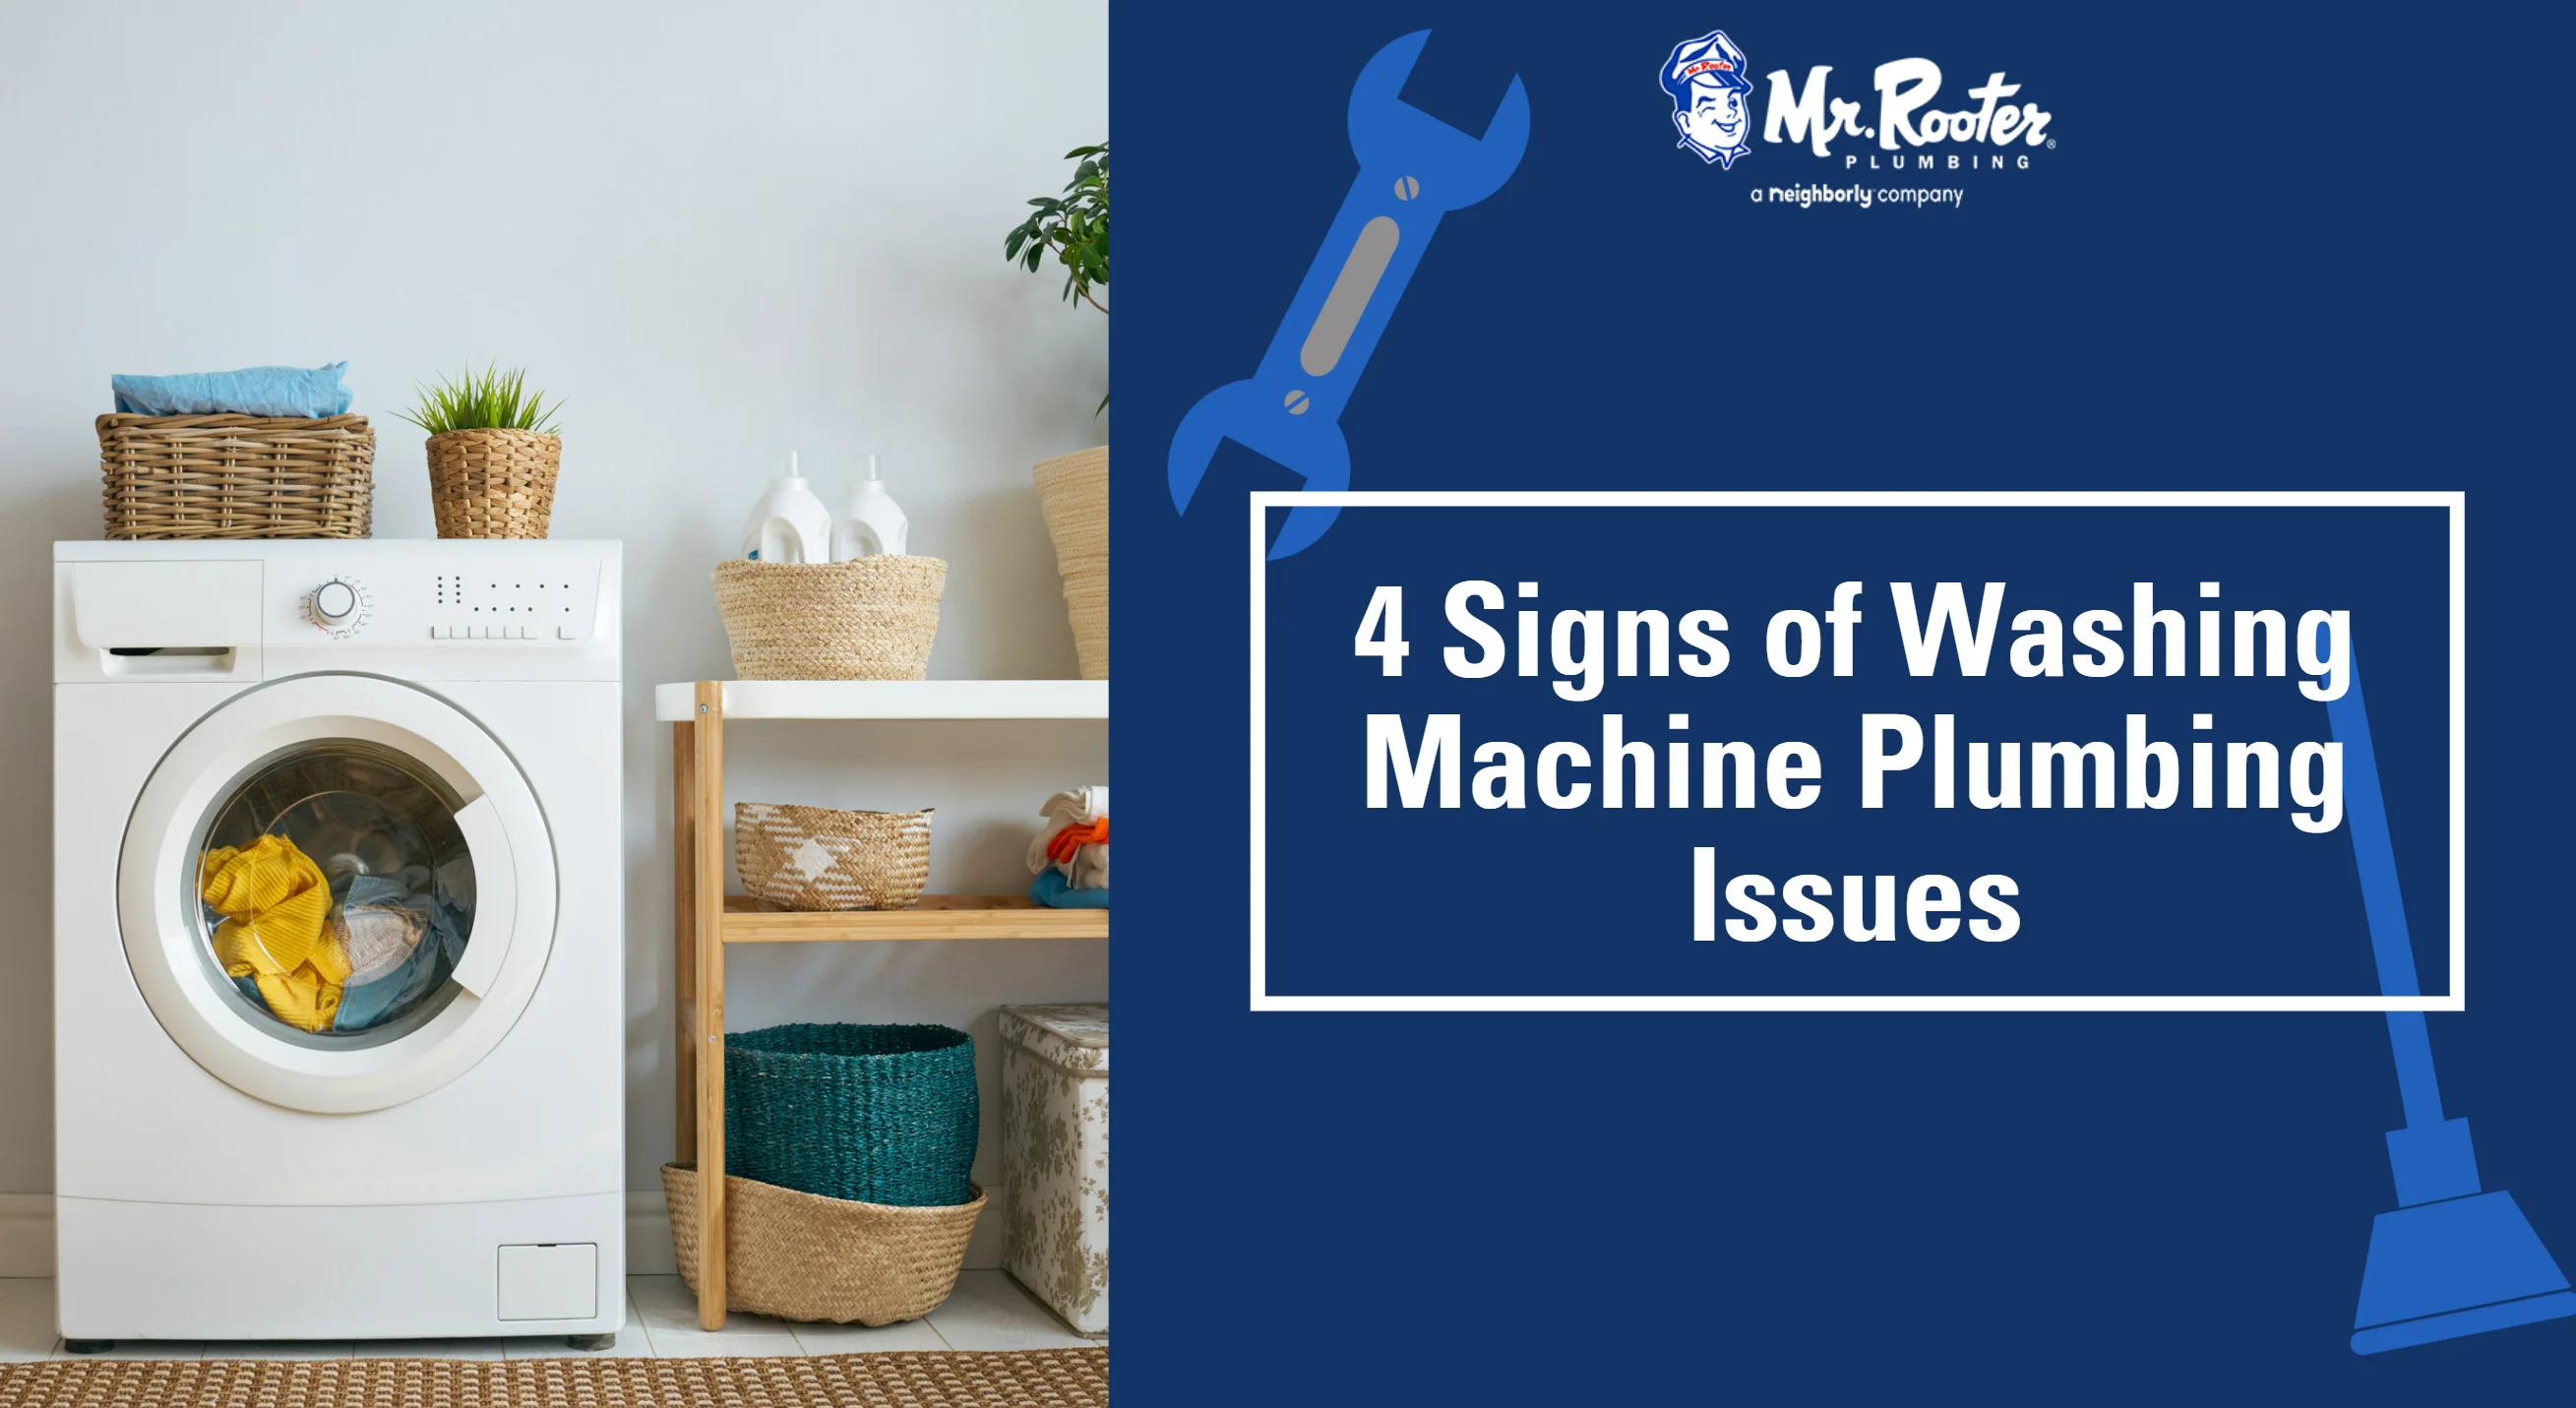 4 Signs of Washing Machine Plumbing Issues